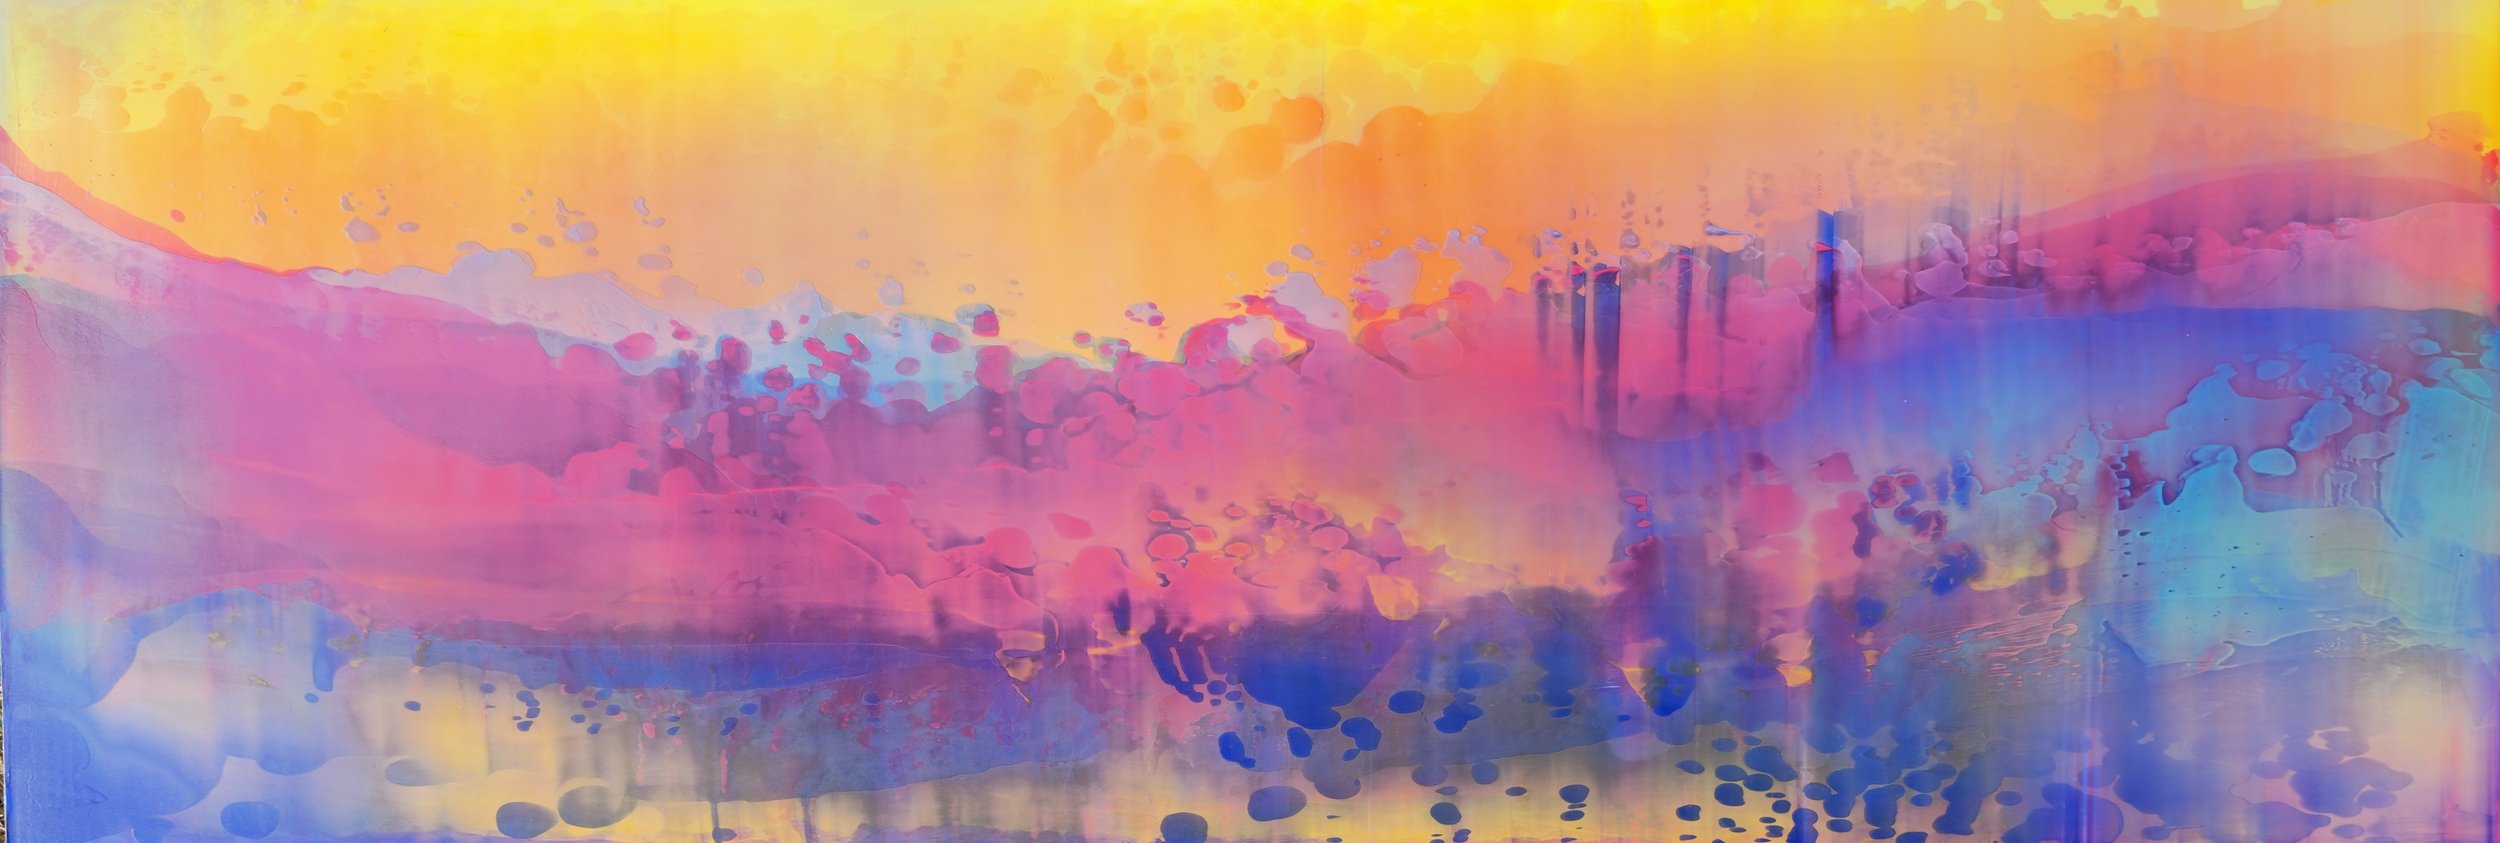 Sunset Swells 12x36 in. sold